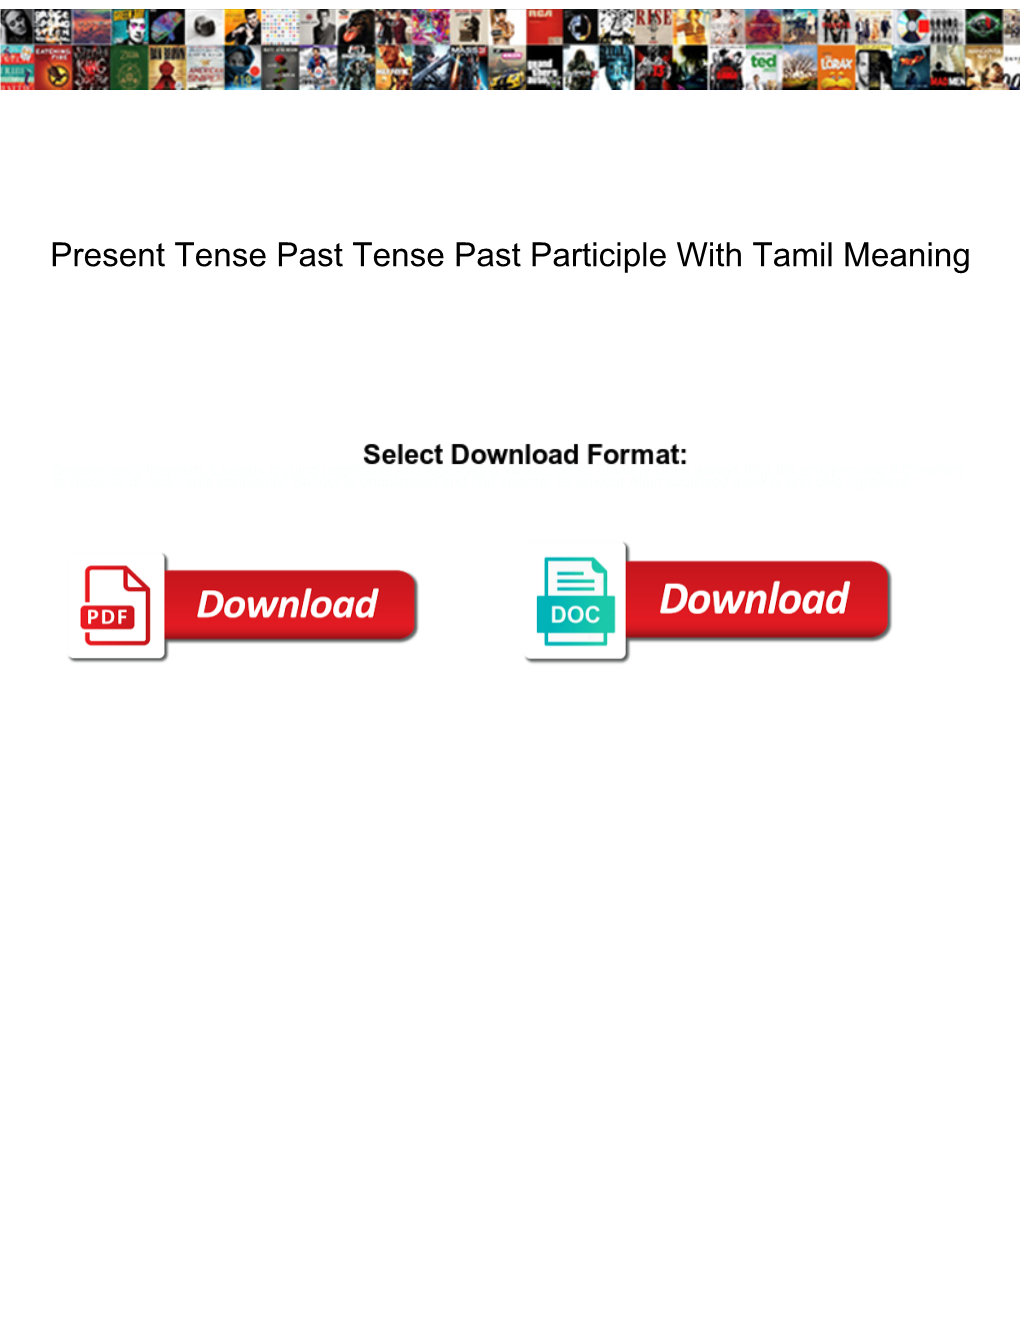 present-tense-past-tense-past-participle-with-tamil-meaning-docslib